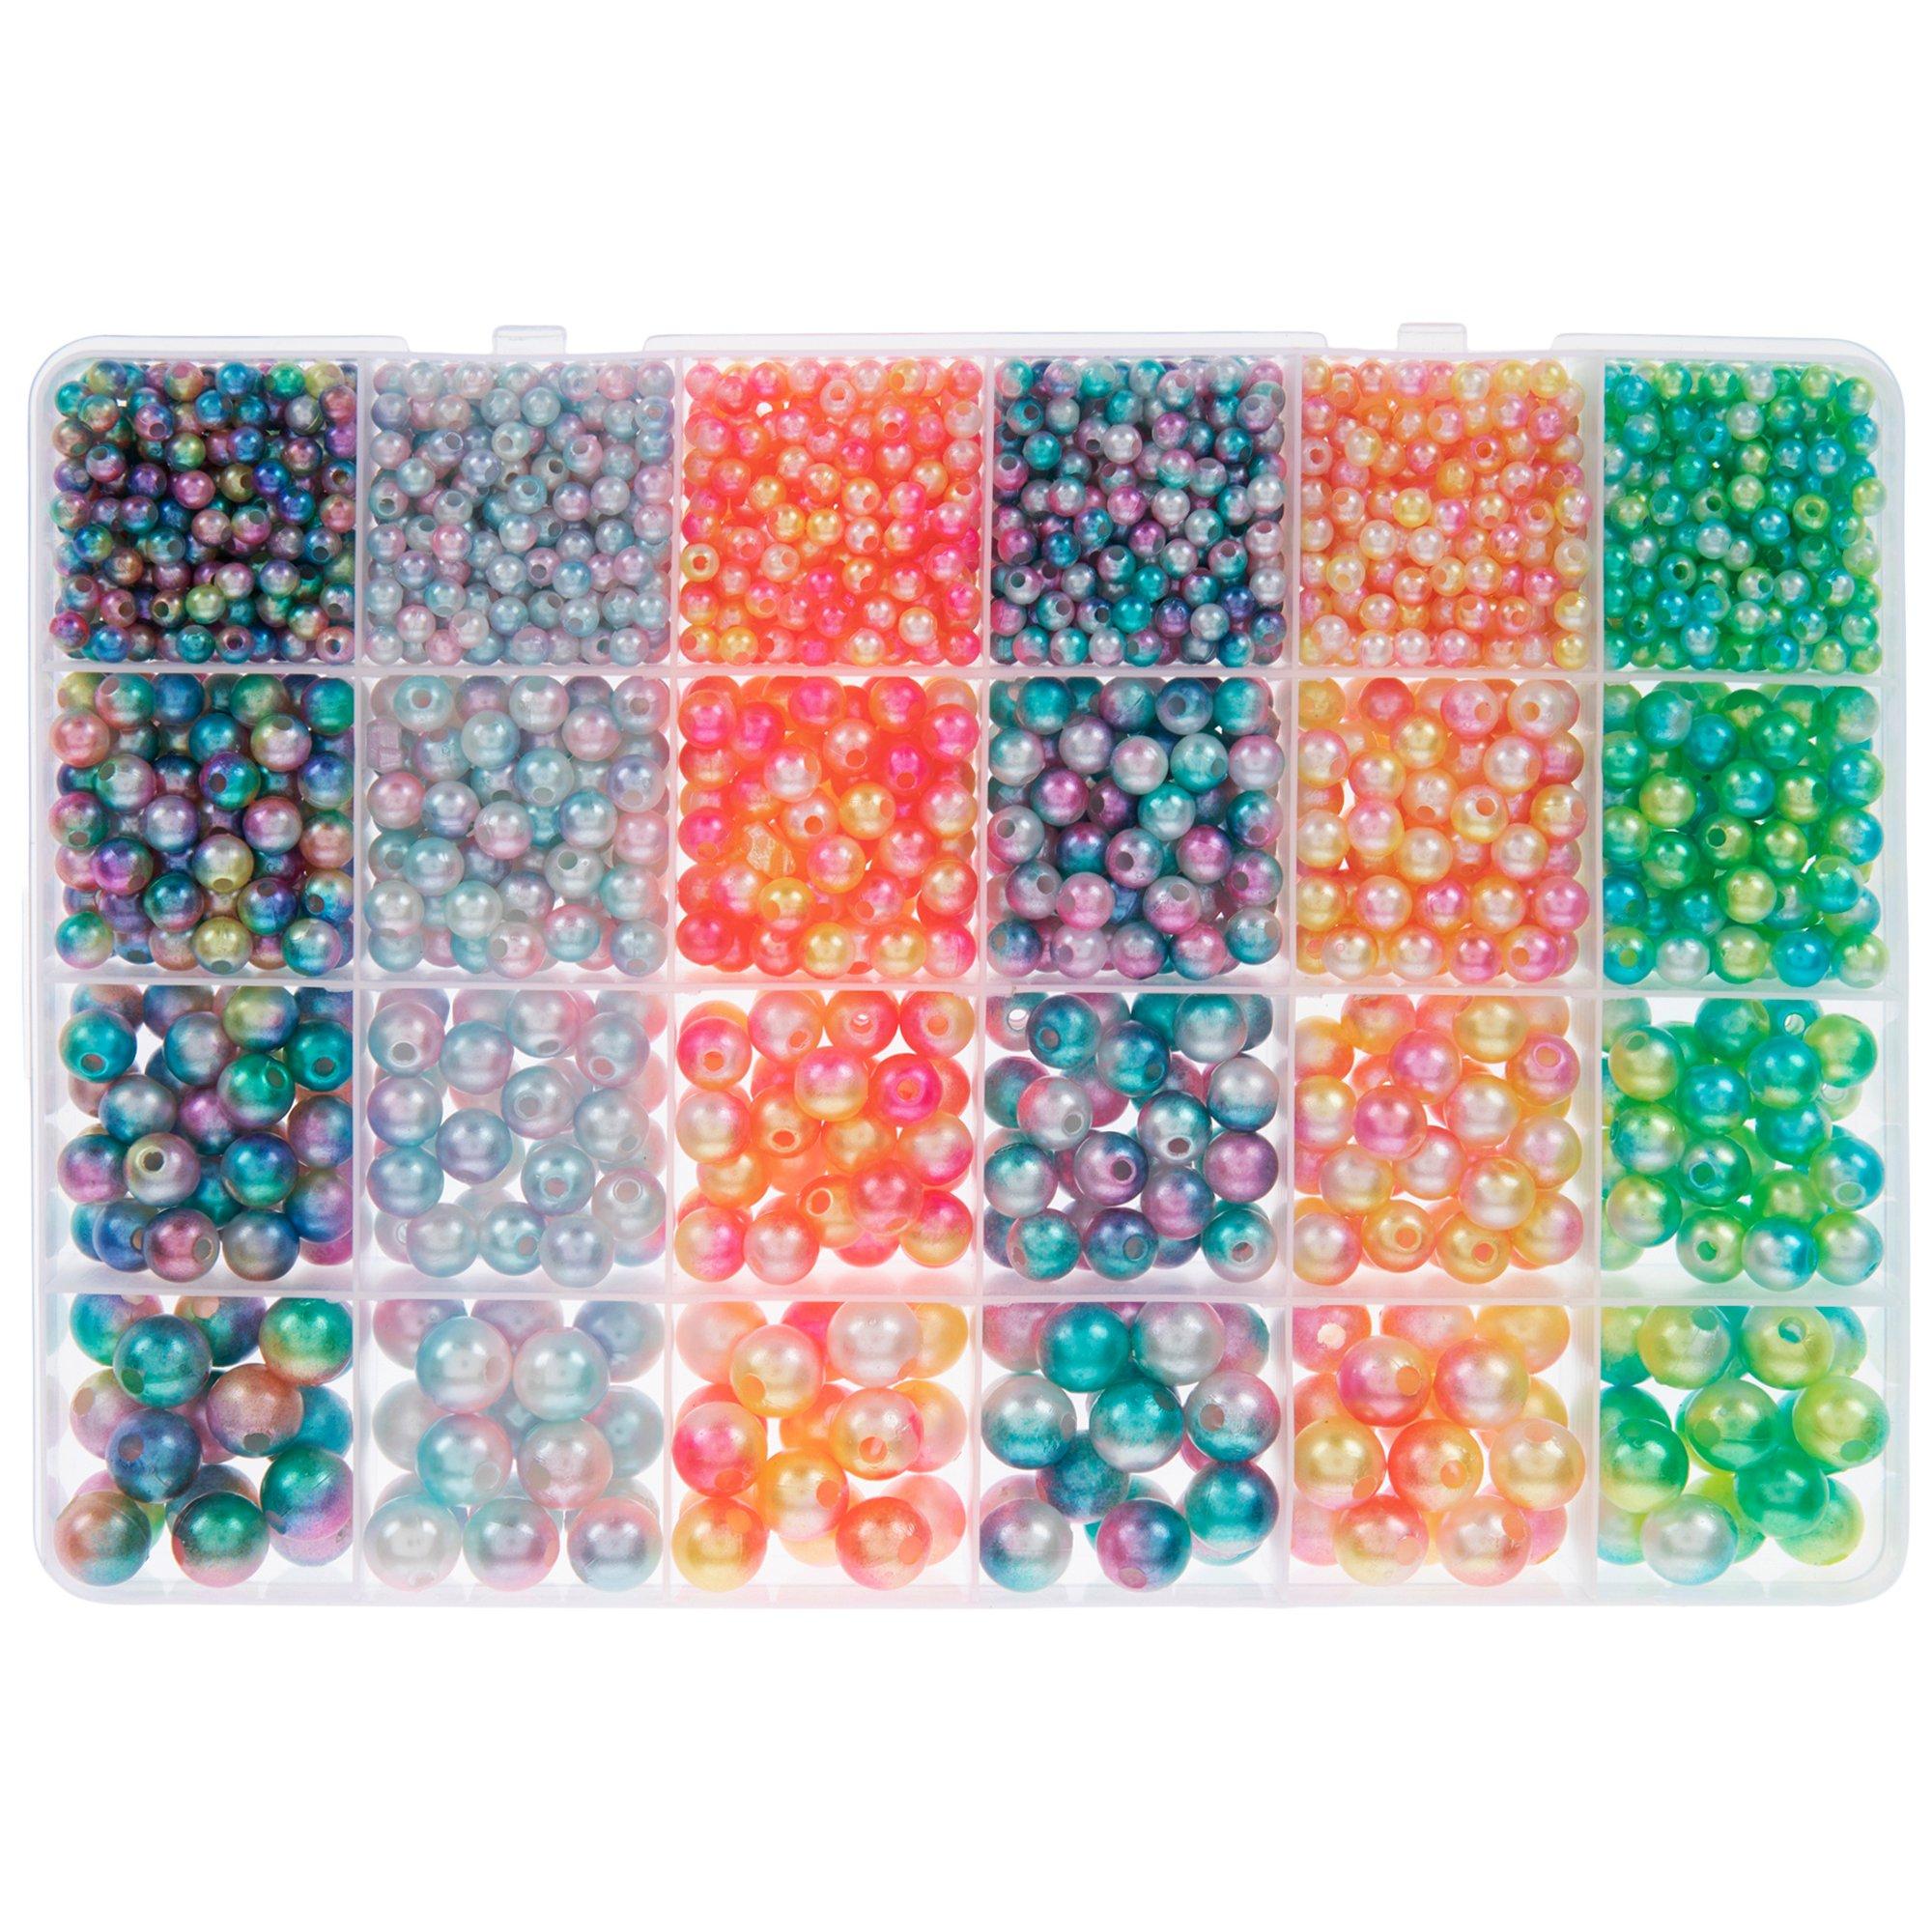 Bright Acrylic Bead Mix for Kandi Bracelets by Adorabilities | Michaels